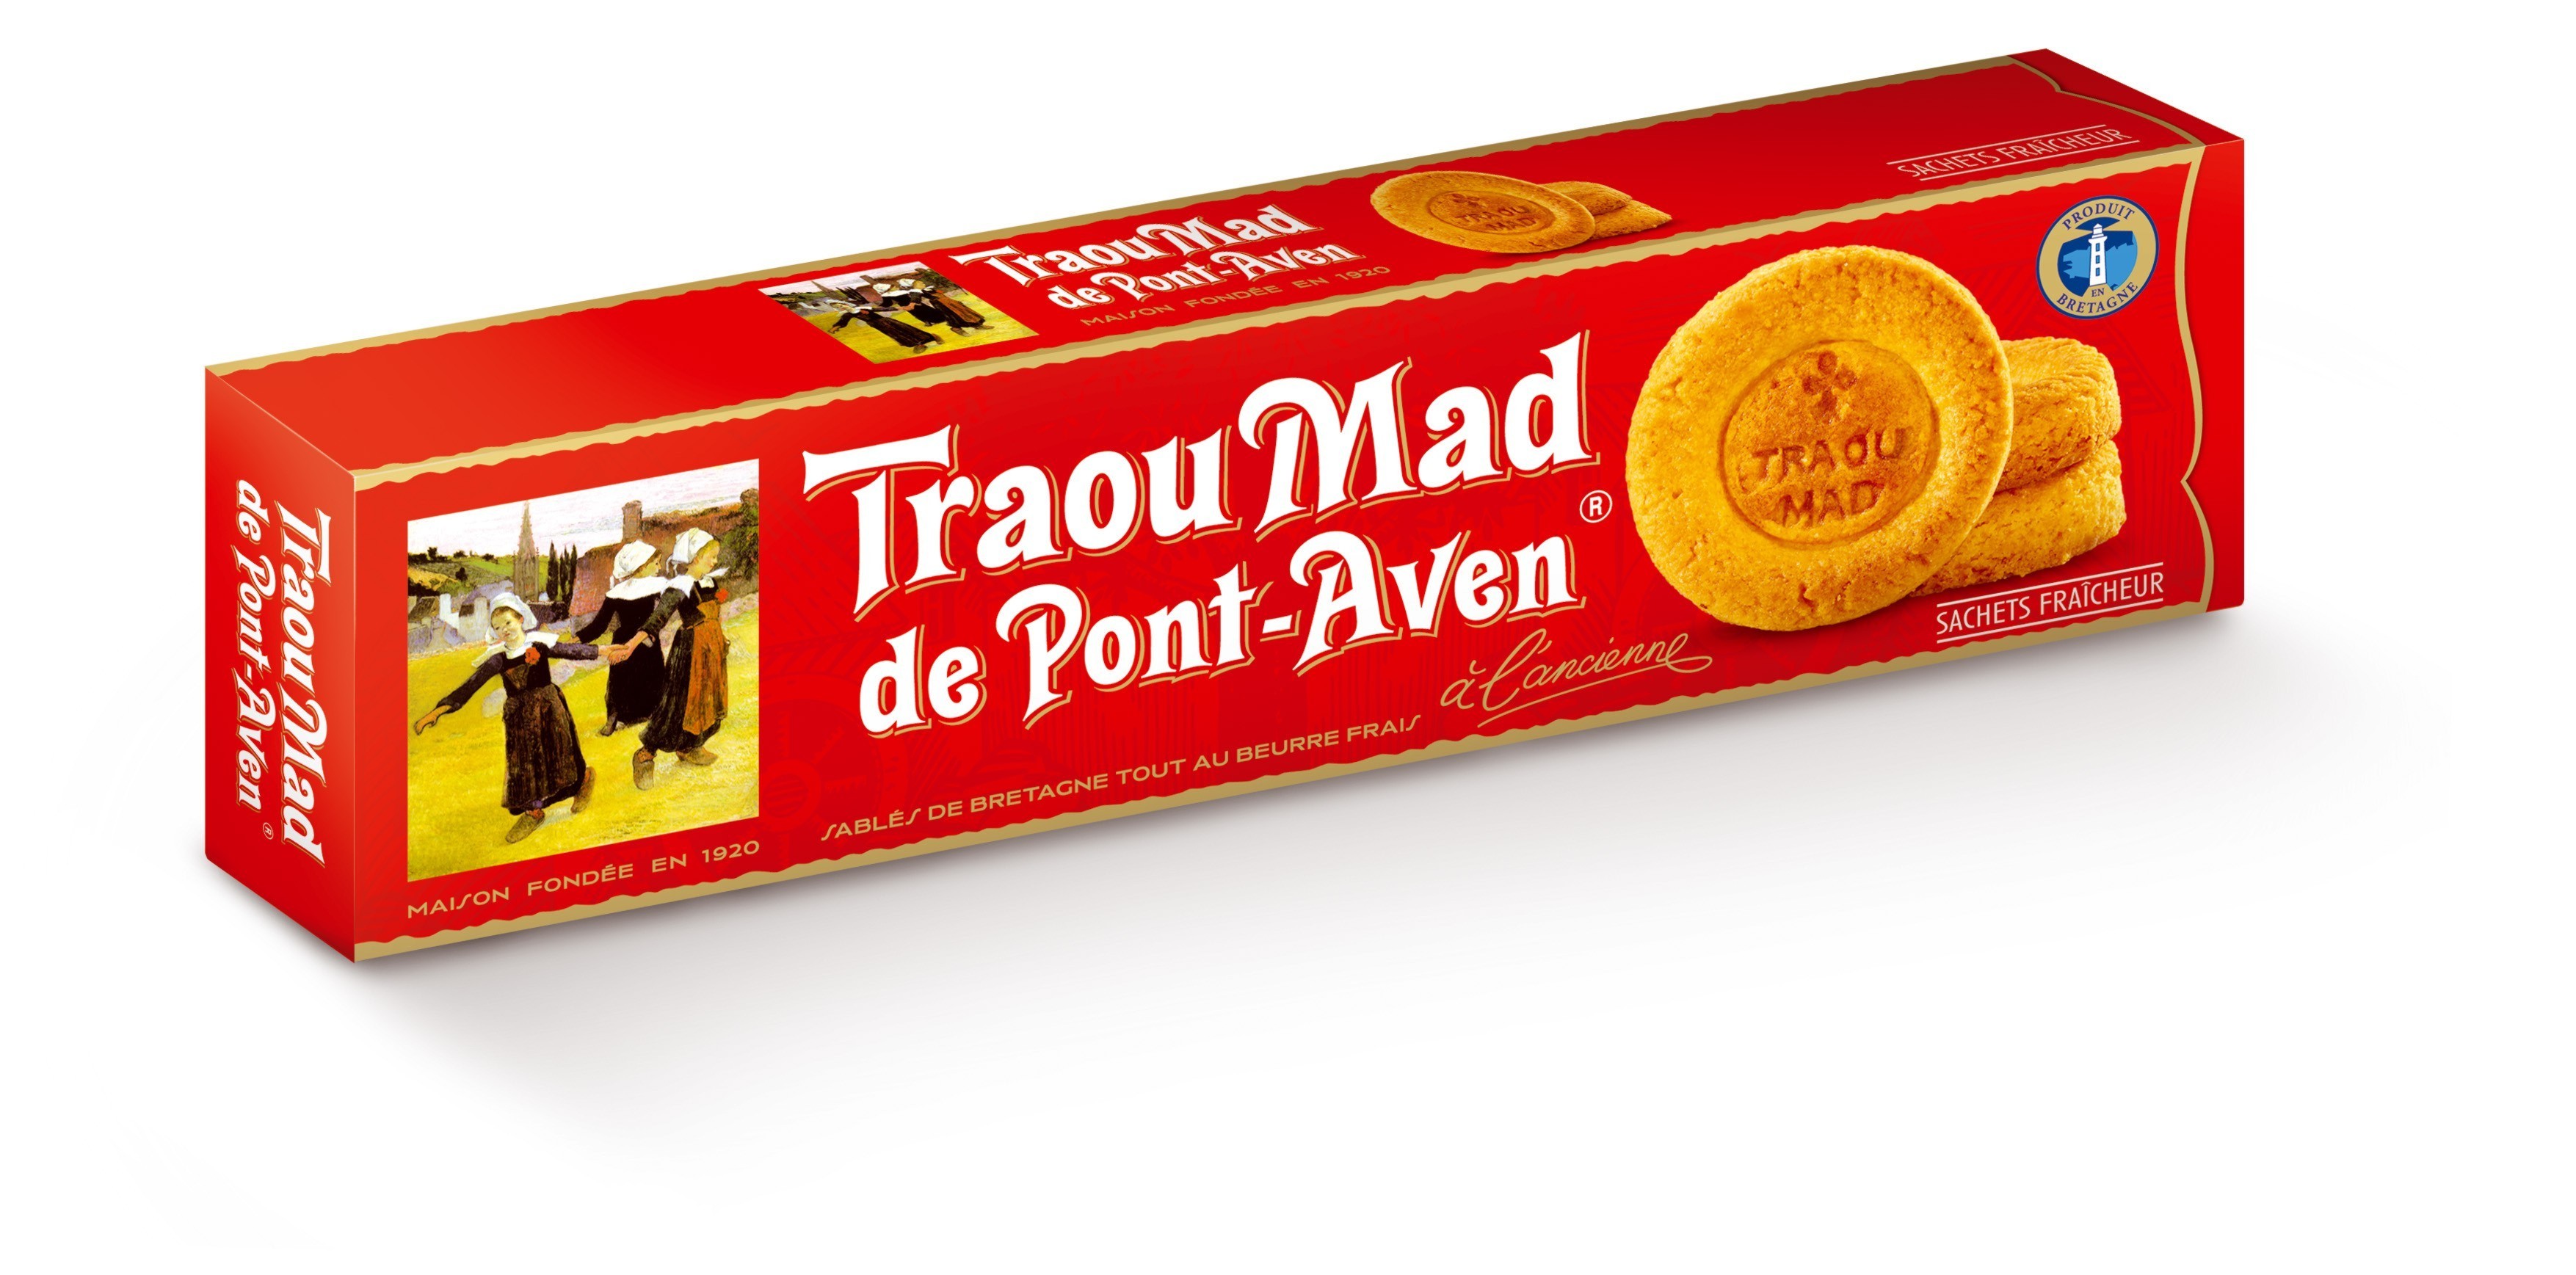 1640-traou-mad-pont-aven-biscuits-29.jpg